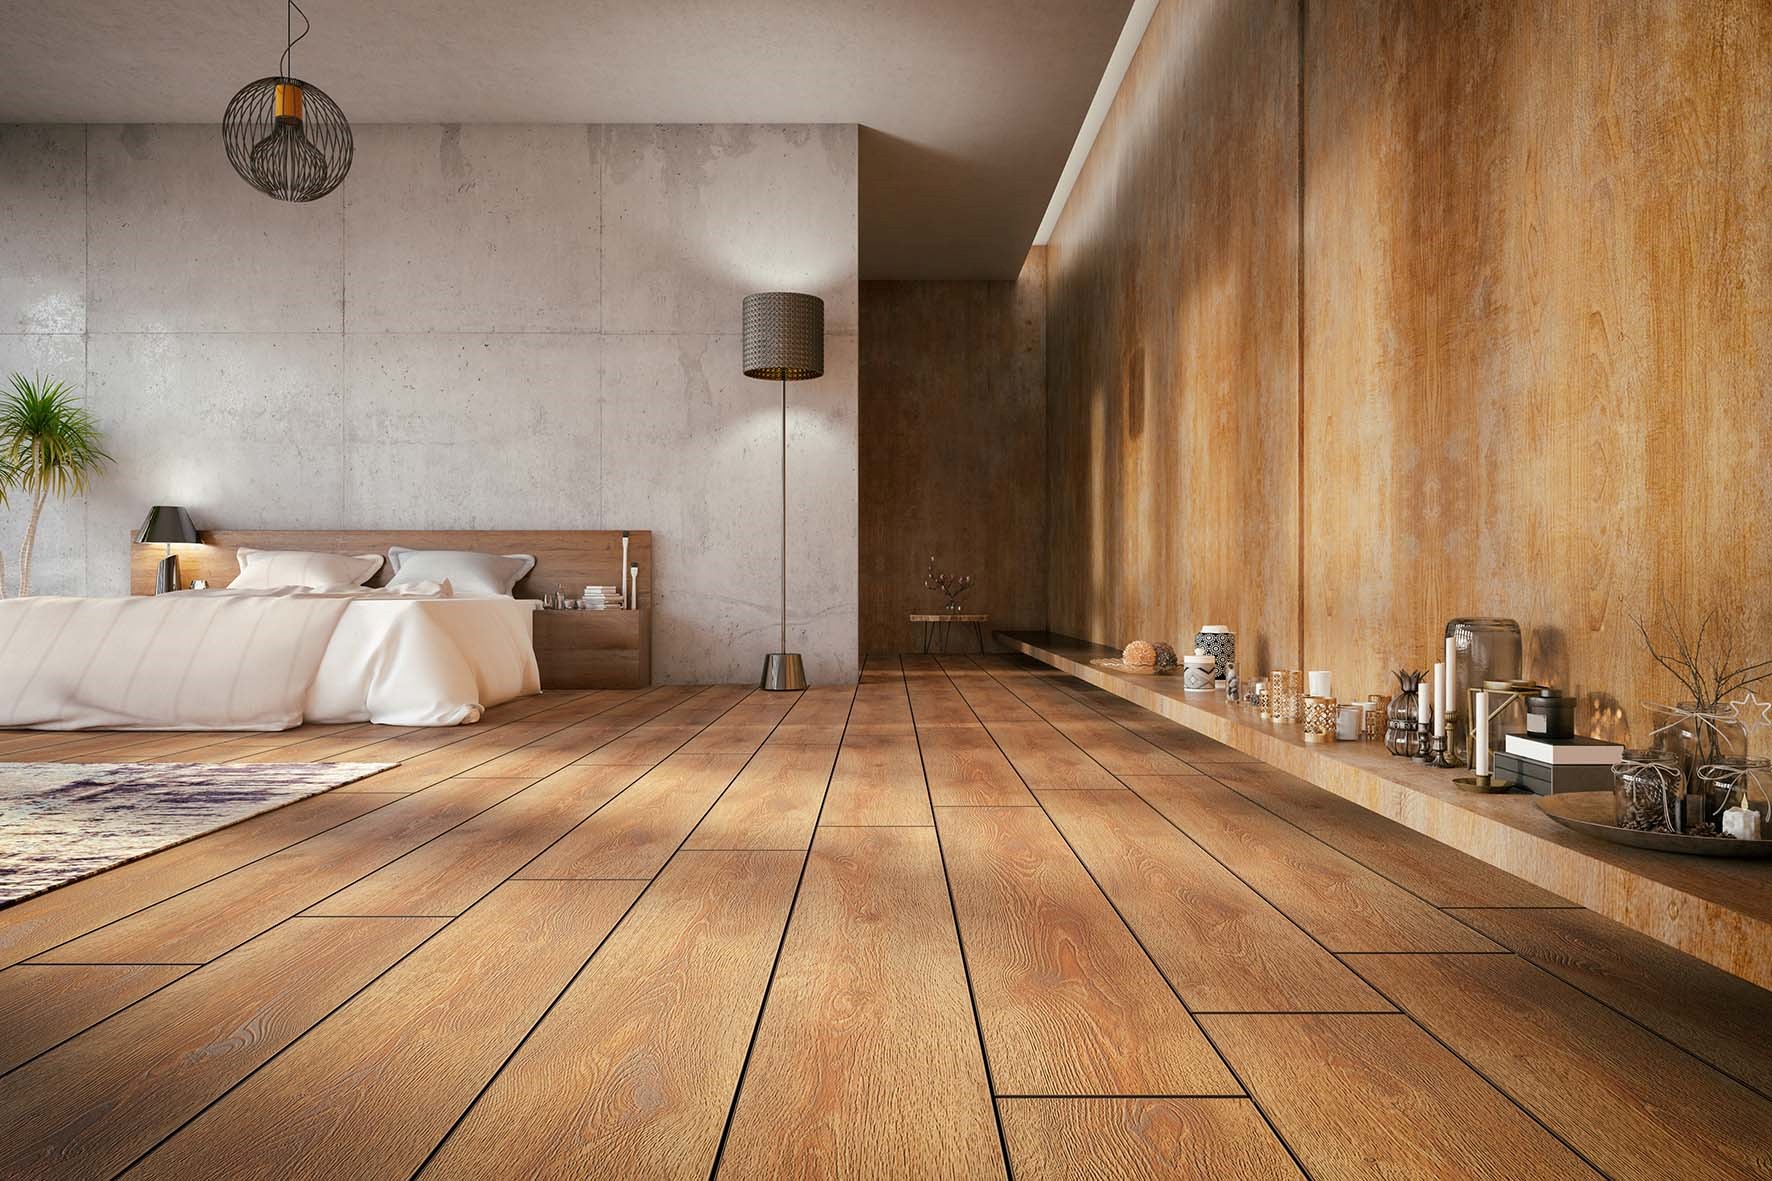 How To Go About Cleaning Wooden Floors